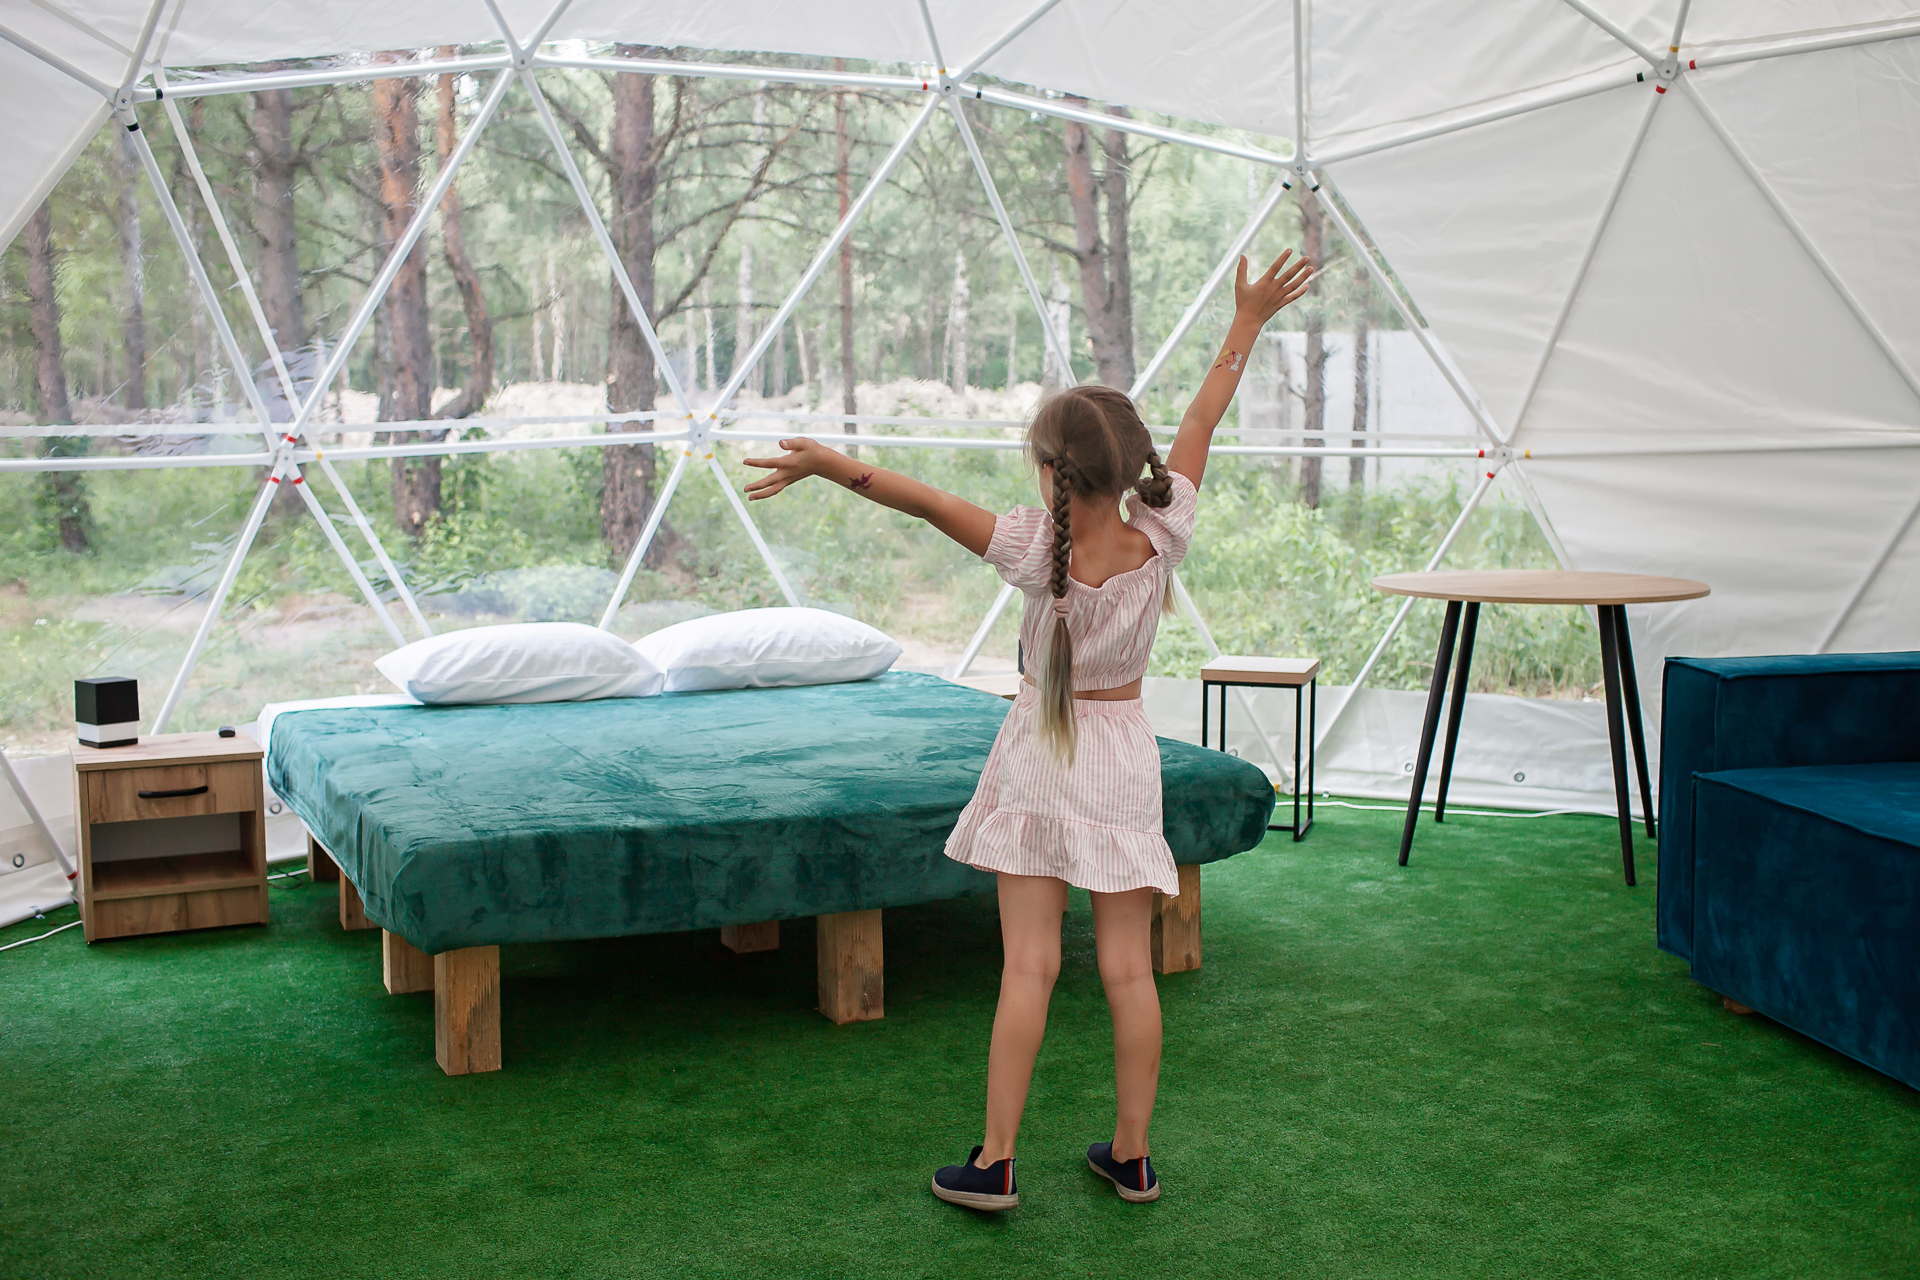 A young girl with her arms outstretched and her back to the camera stands in front of a bed inside a glamping dome